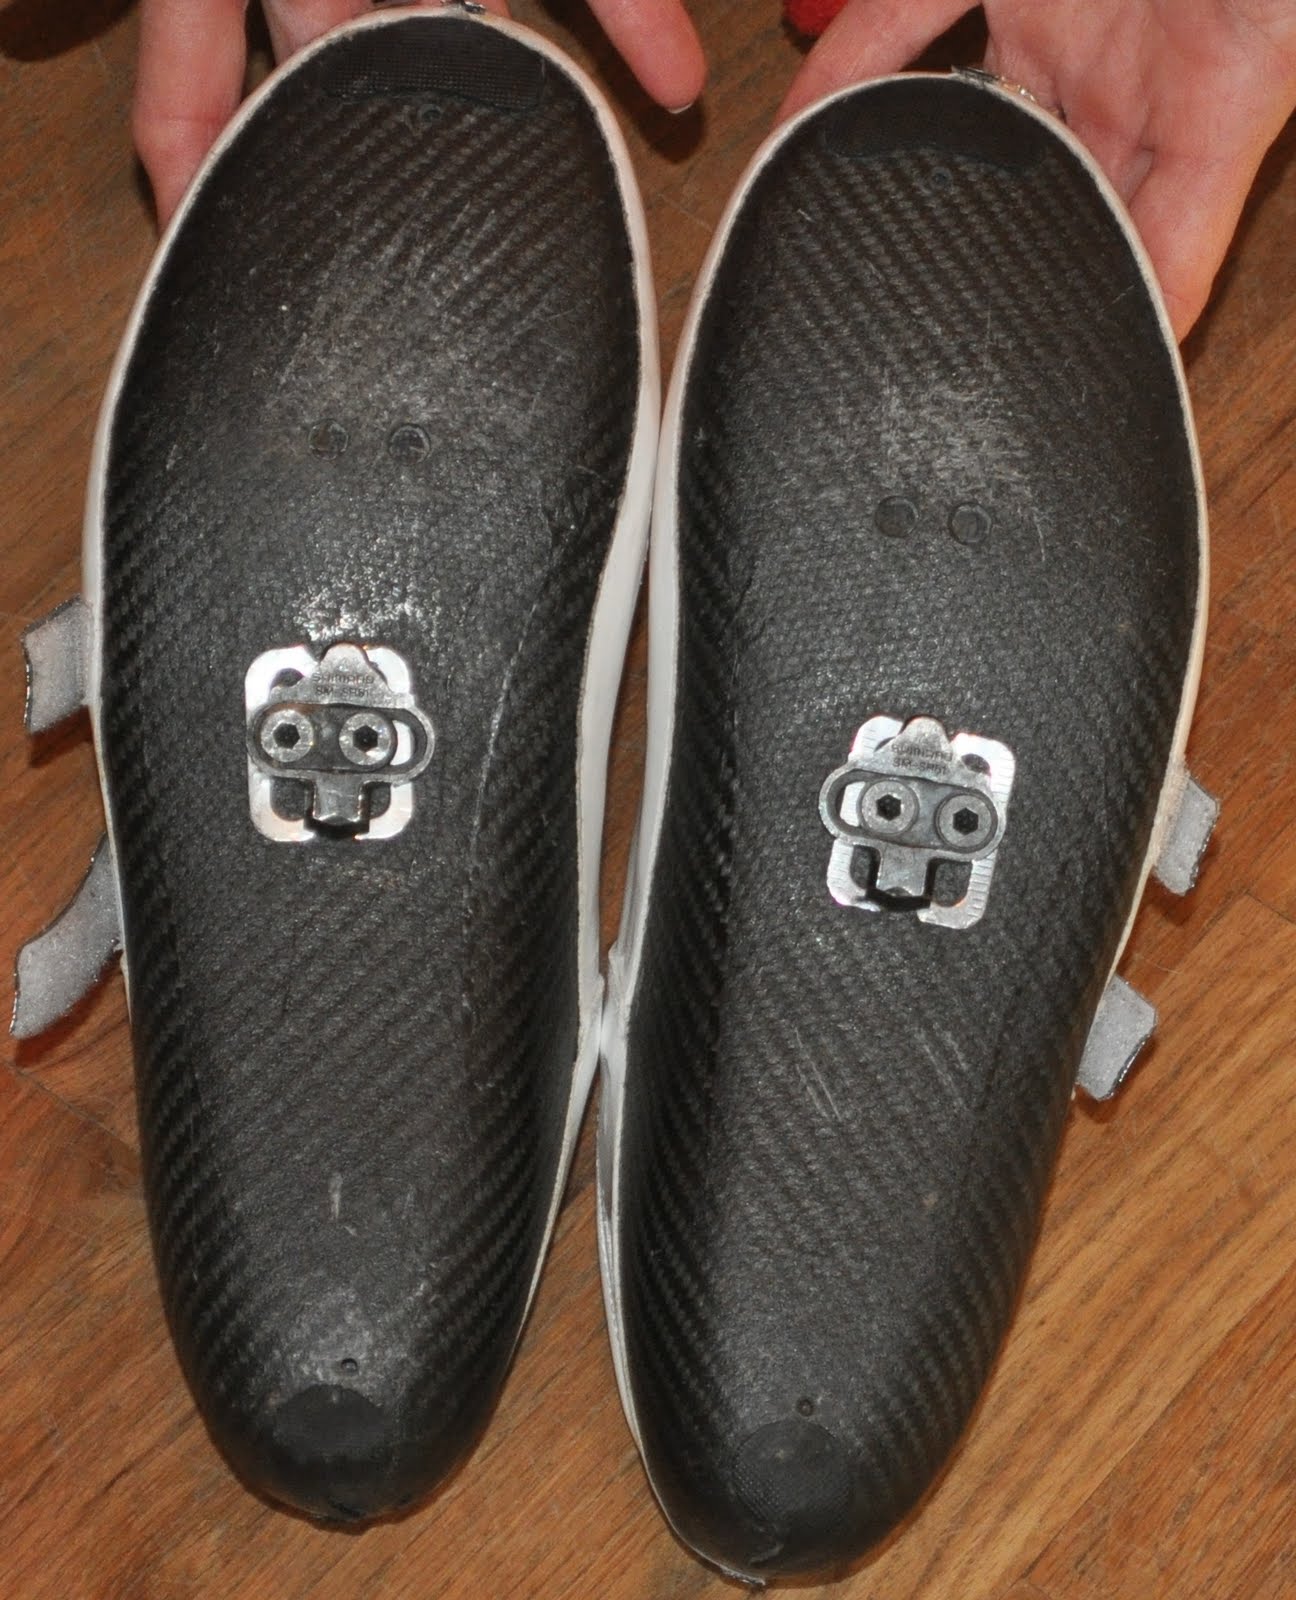 positioning cleats on cycling shoes